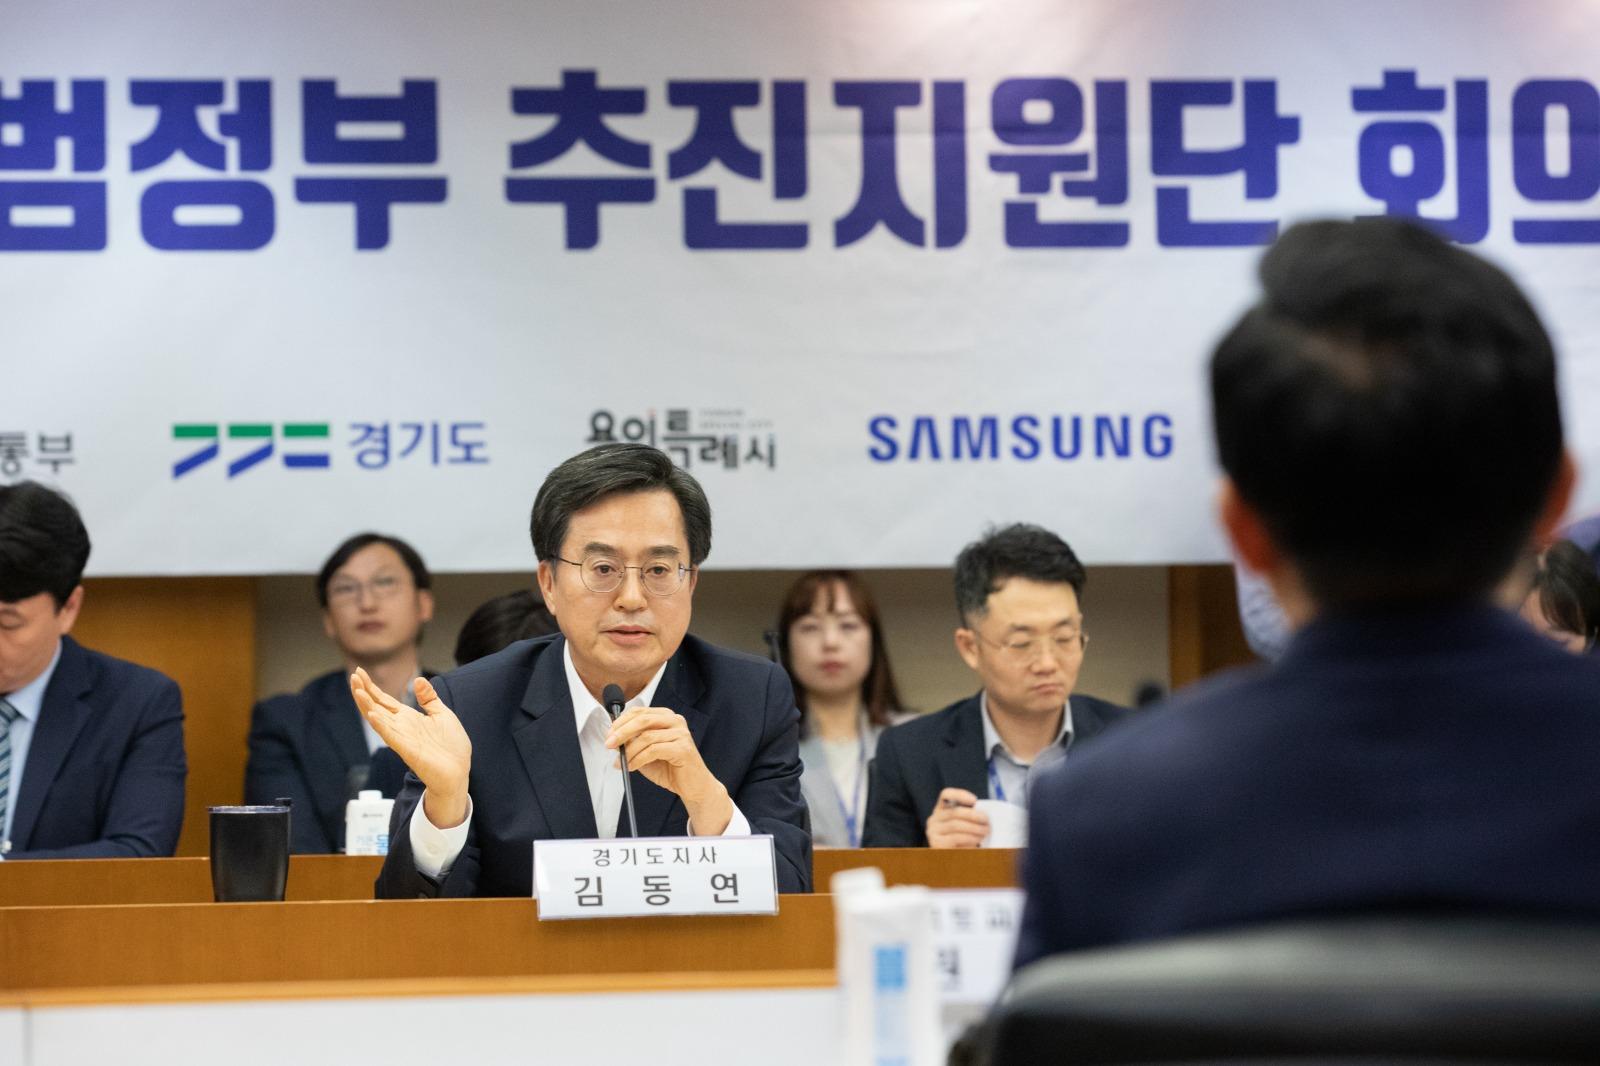 On June 27, Governor Kim Dong-yeon announced that he would make efforts to create a fabless cluster in the 3rd Pangyo Techno Valley. (Image courtesy of Gyeonggi Province)